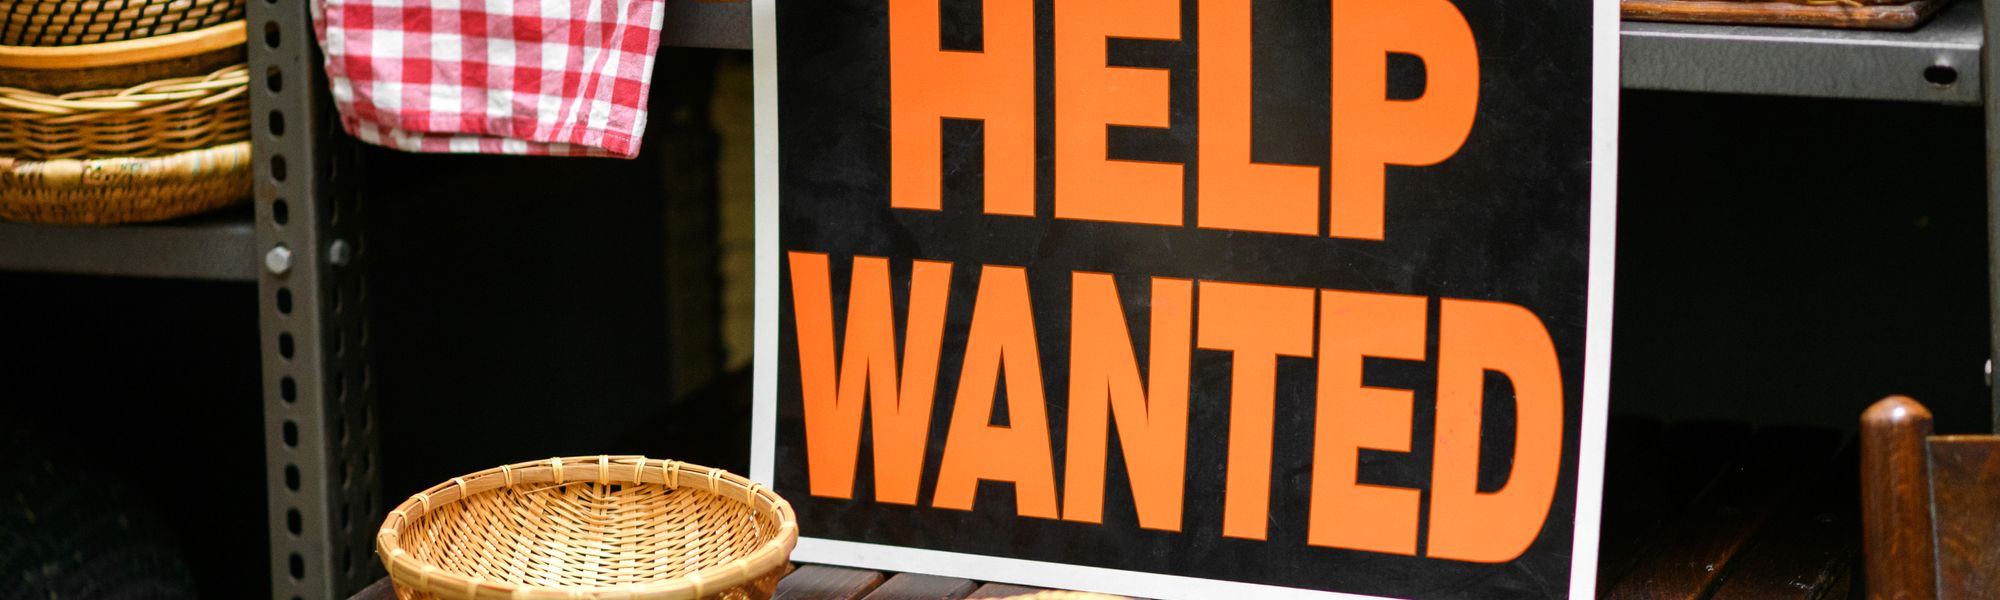 Help Wanted Sign Displayed In A Shop In A Job Vaca 2021 09 01 09 33 59 Utc